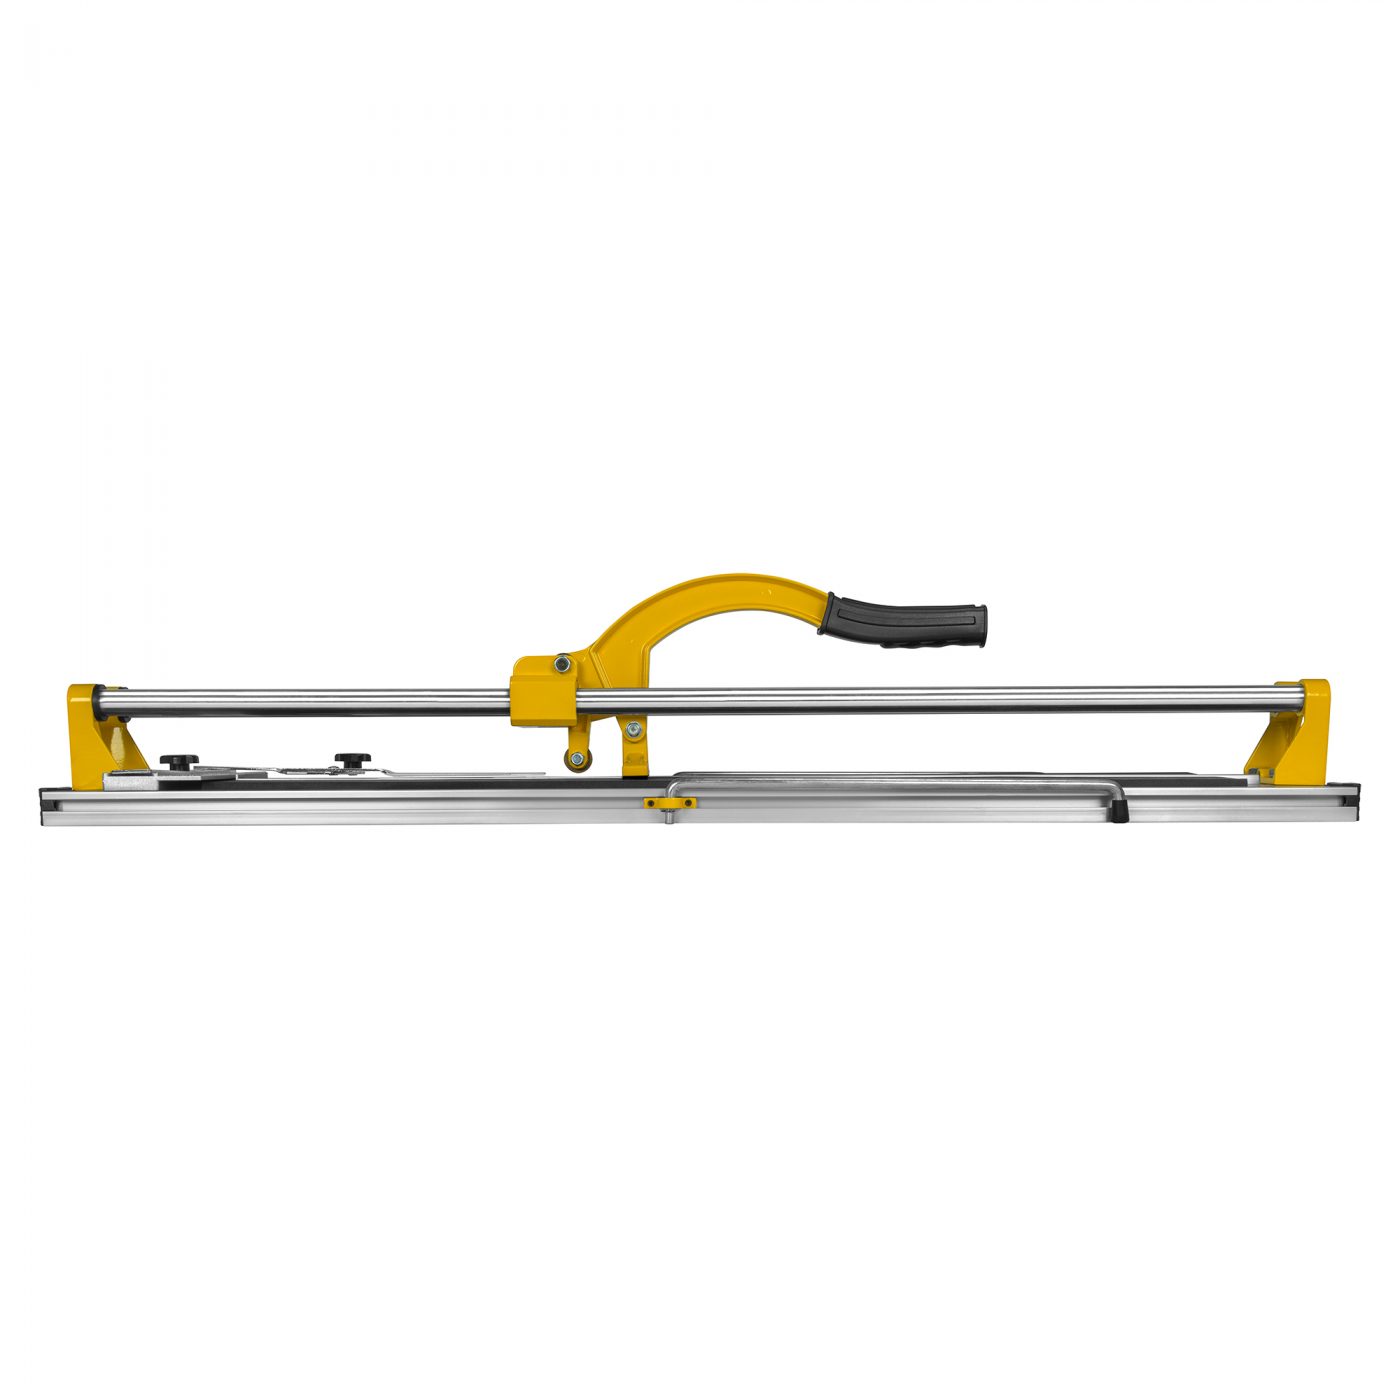 35" Professional Tile Cutter